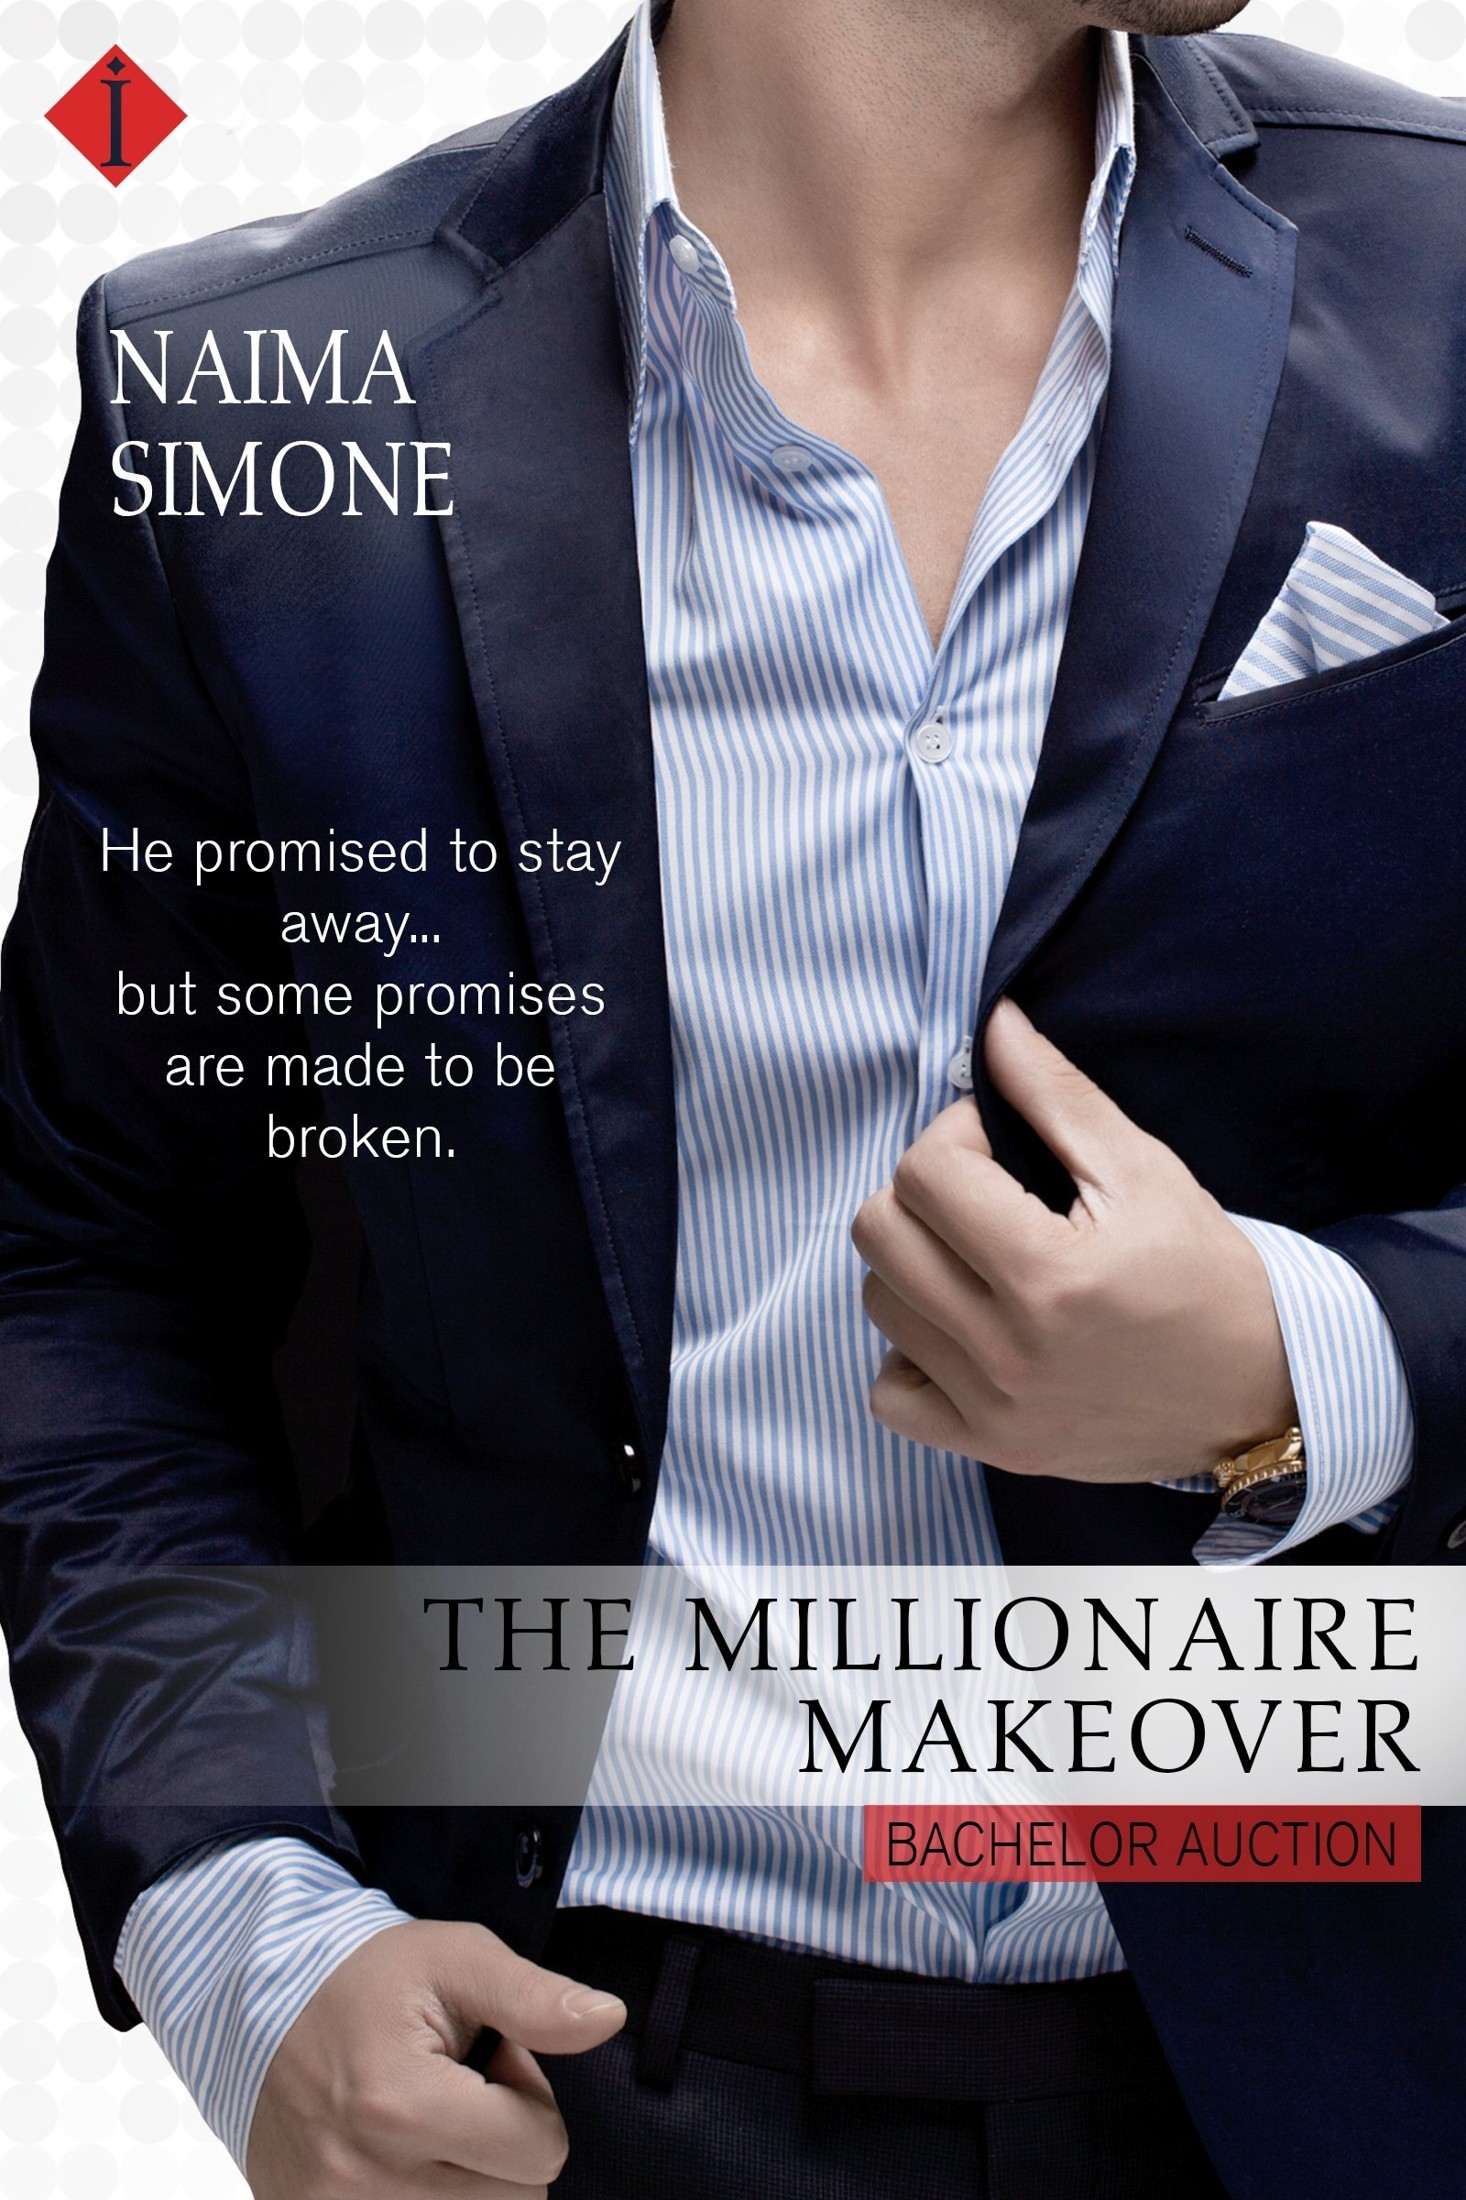 The Millionaire Makeover (Bachelor Auction) by Naima Simone